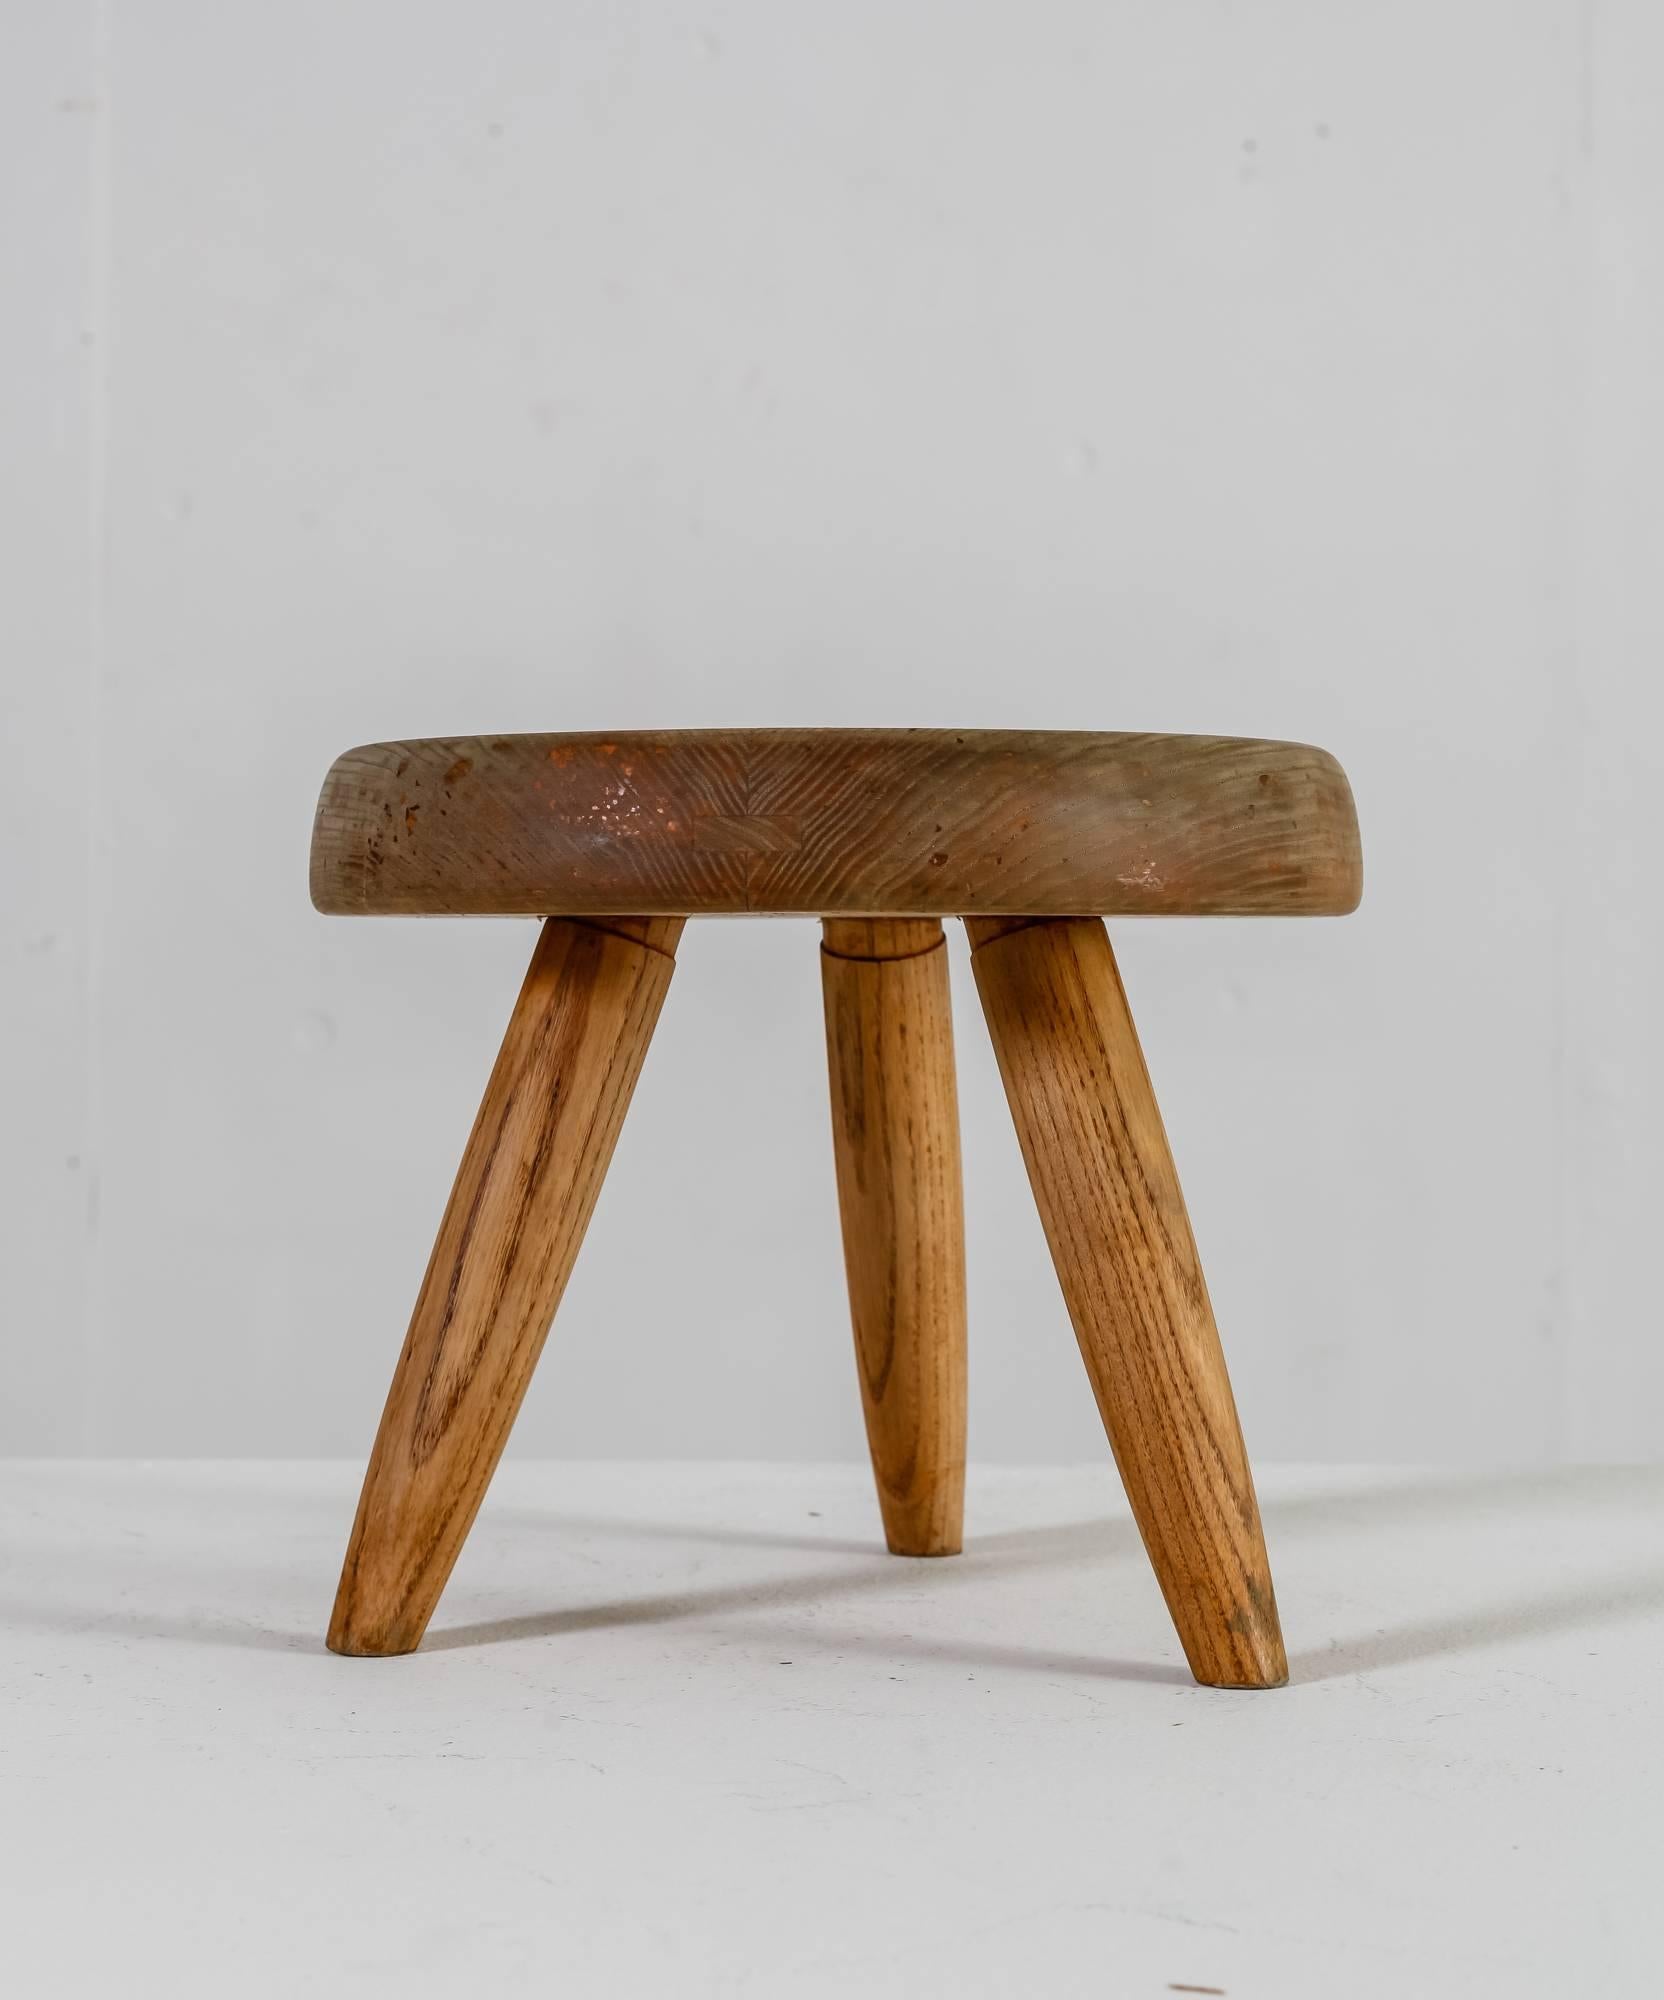 A low oak tripod stool with a thick round seating, by Charlotte Perriand. The wood has a stunning, heavy patina and beautiful wood connections.

The first tripod stool of this type by Perriand was designed in 1947 and produced by Georges